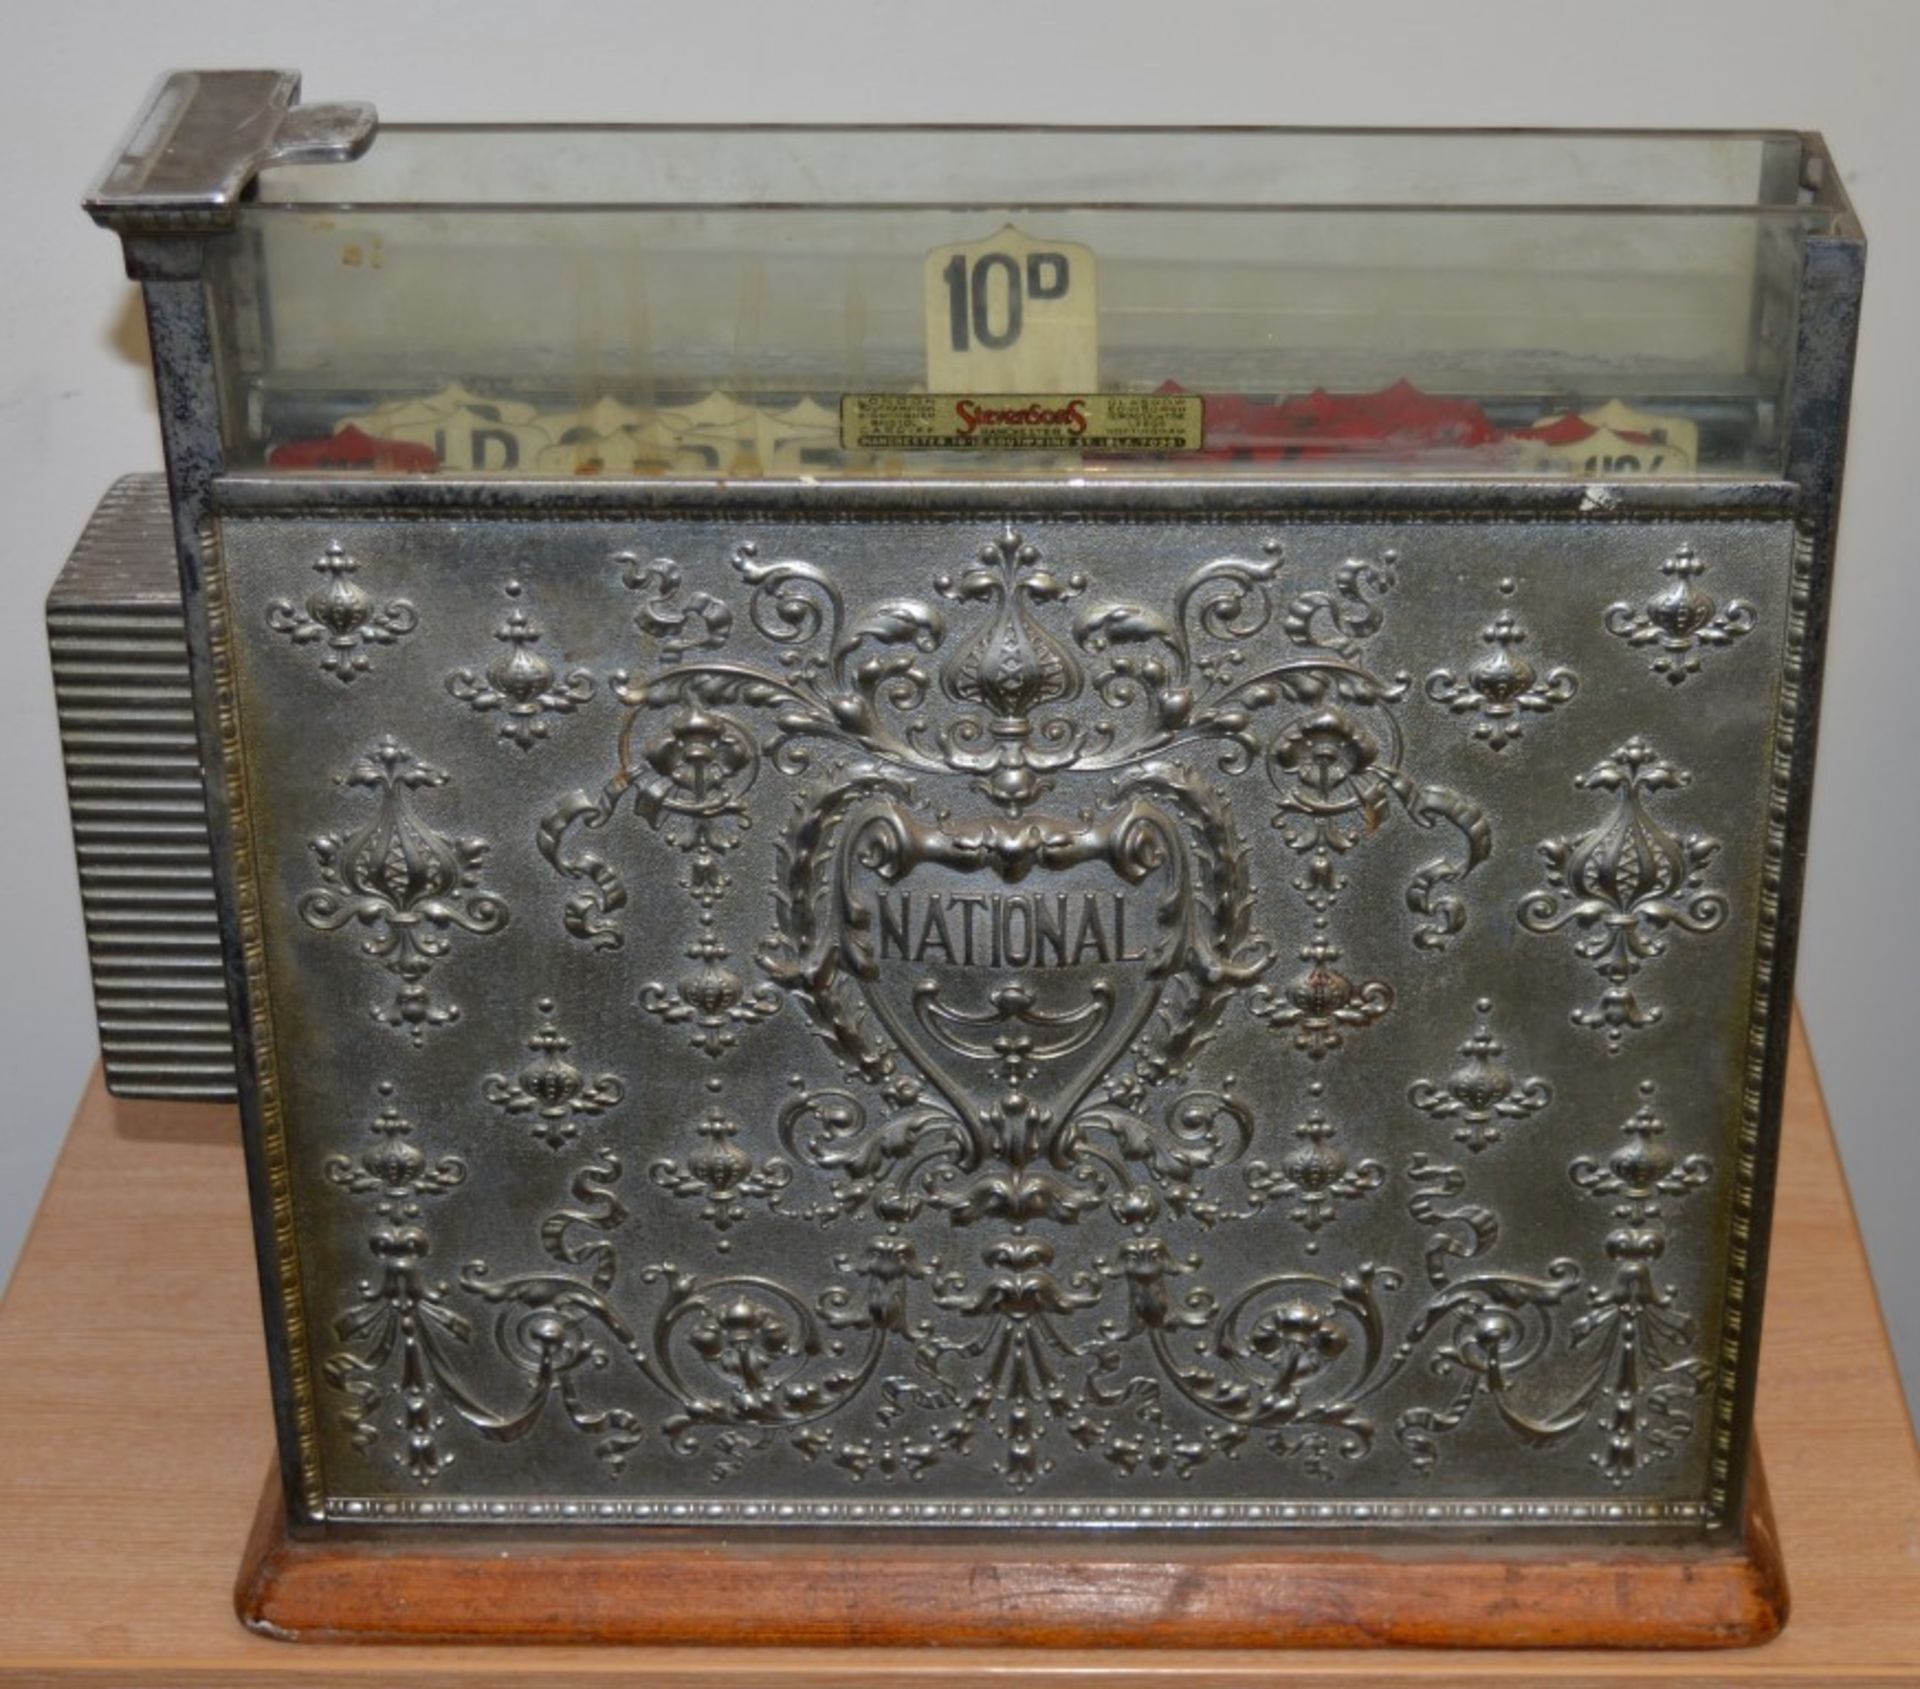 1 x Exquisite Antique National Cash Register - Circa Early 1900's - Perfect For Barbers Shop, Tattoo - Image 28 of 35